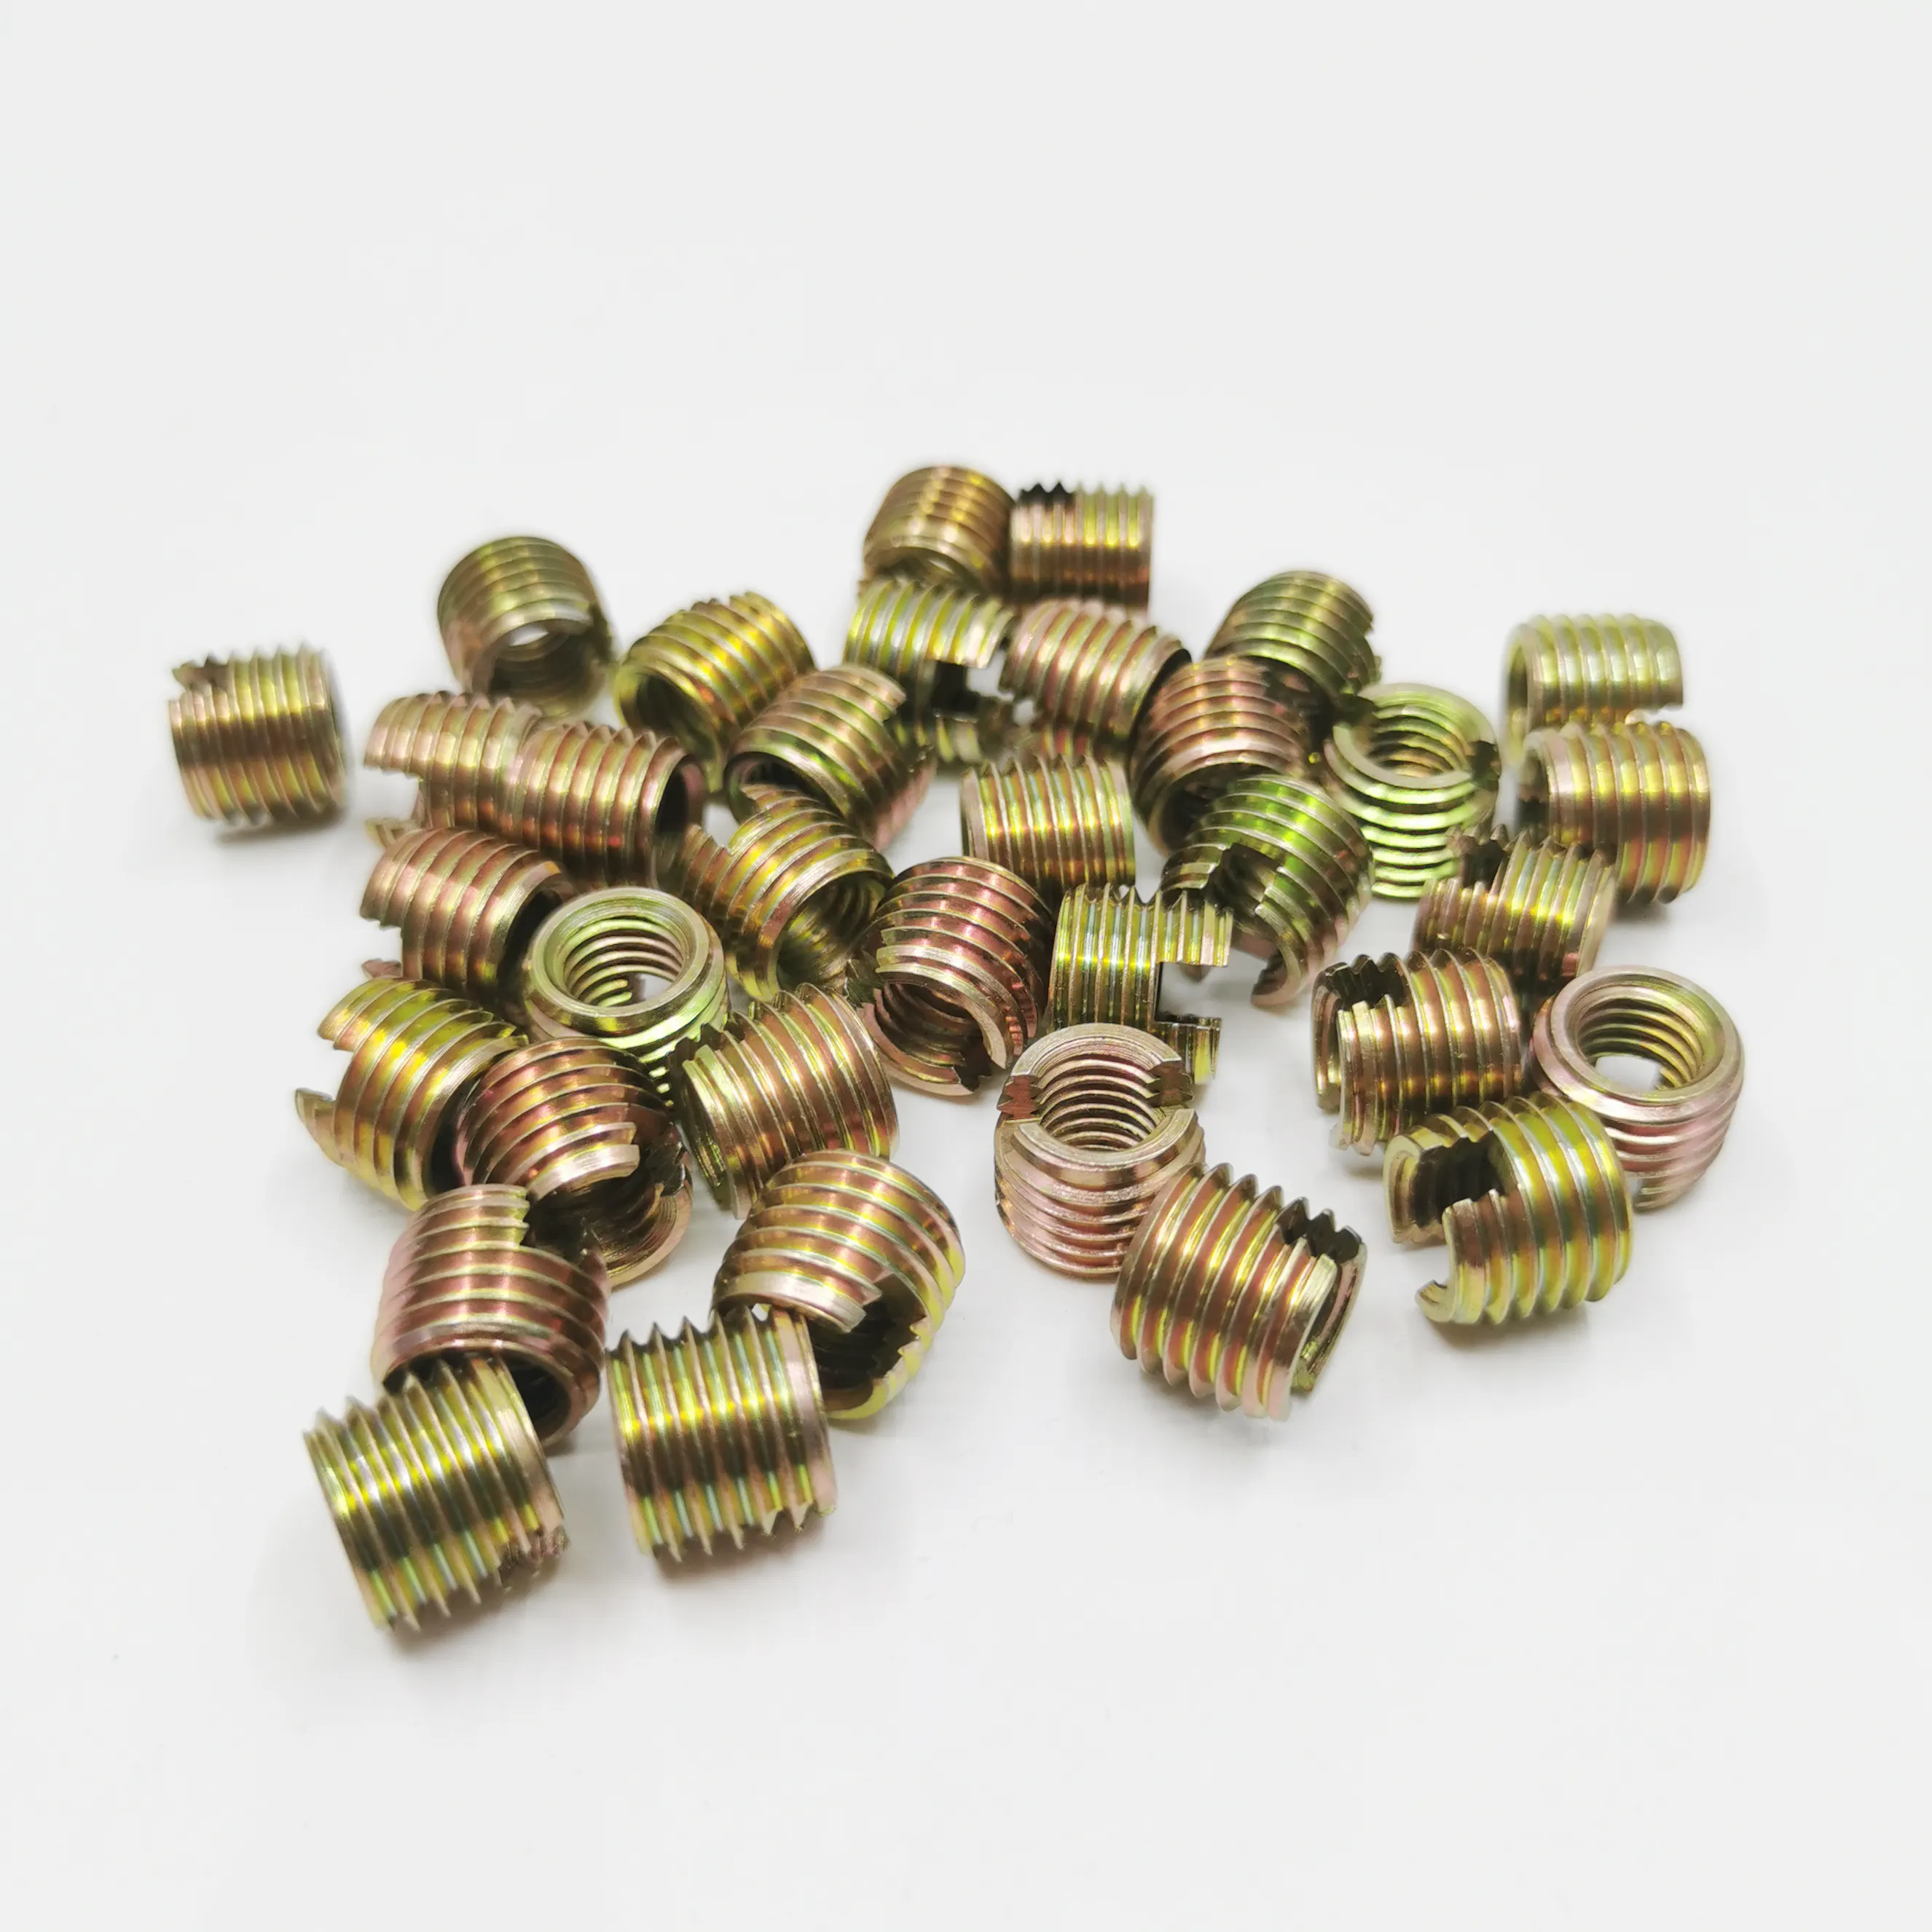 Type 302 Galvanized Carbon Steel M8x1.25x10 Helical Thread Reinforce Repair Self Tapping Slotted Screw Threaded Insert Nut